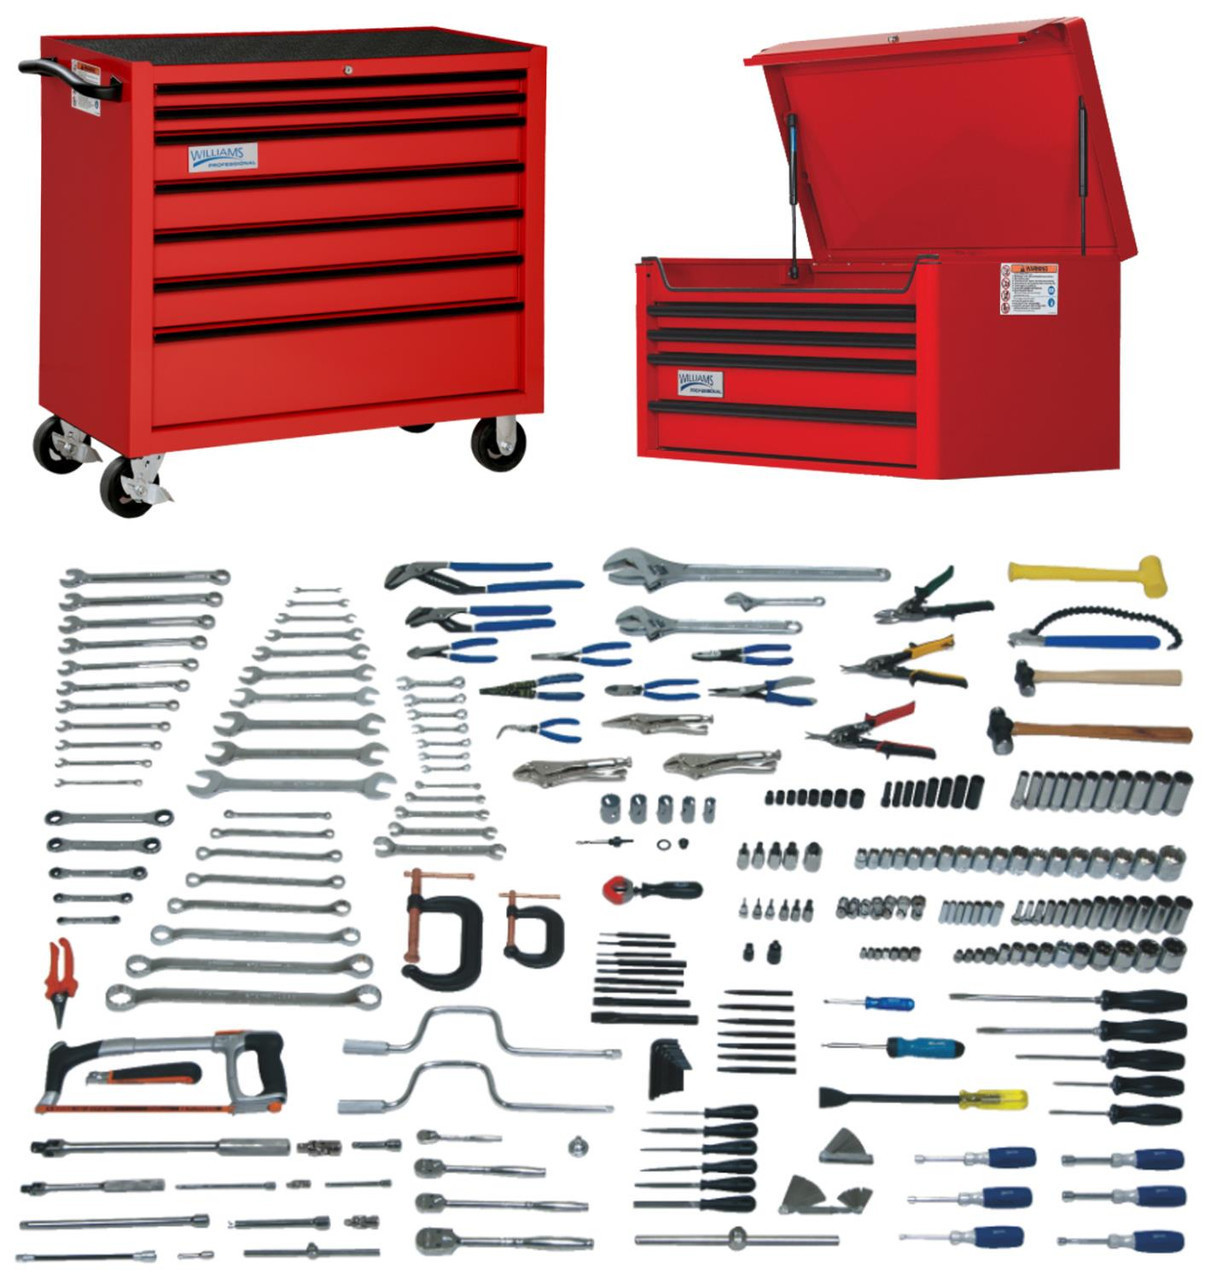 Williams Complete Advanced Maintenance Service Tool Set with Boxes - JHWADVMNTTB